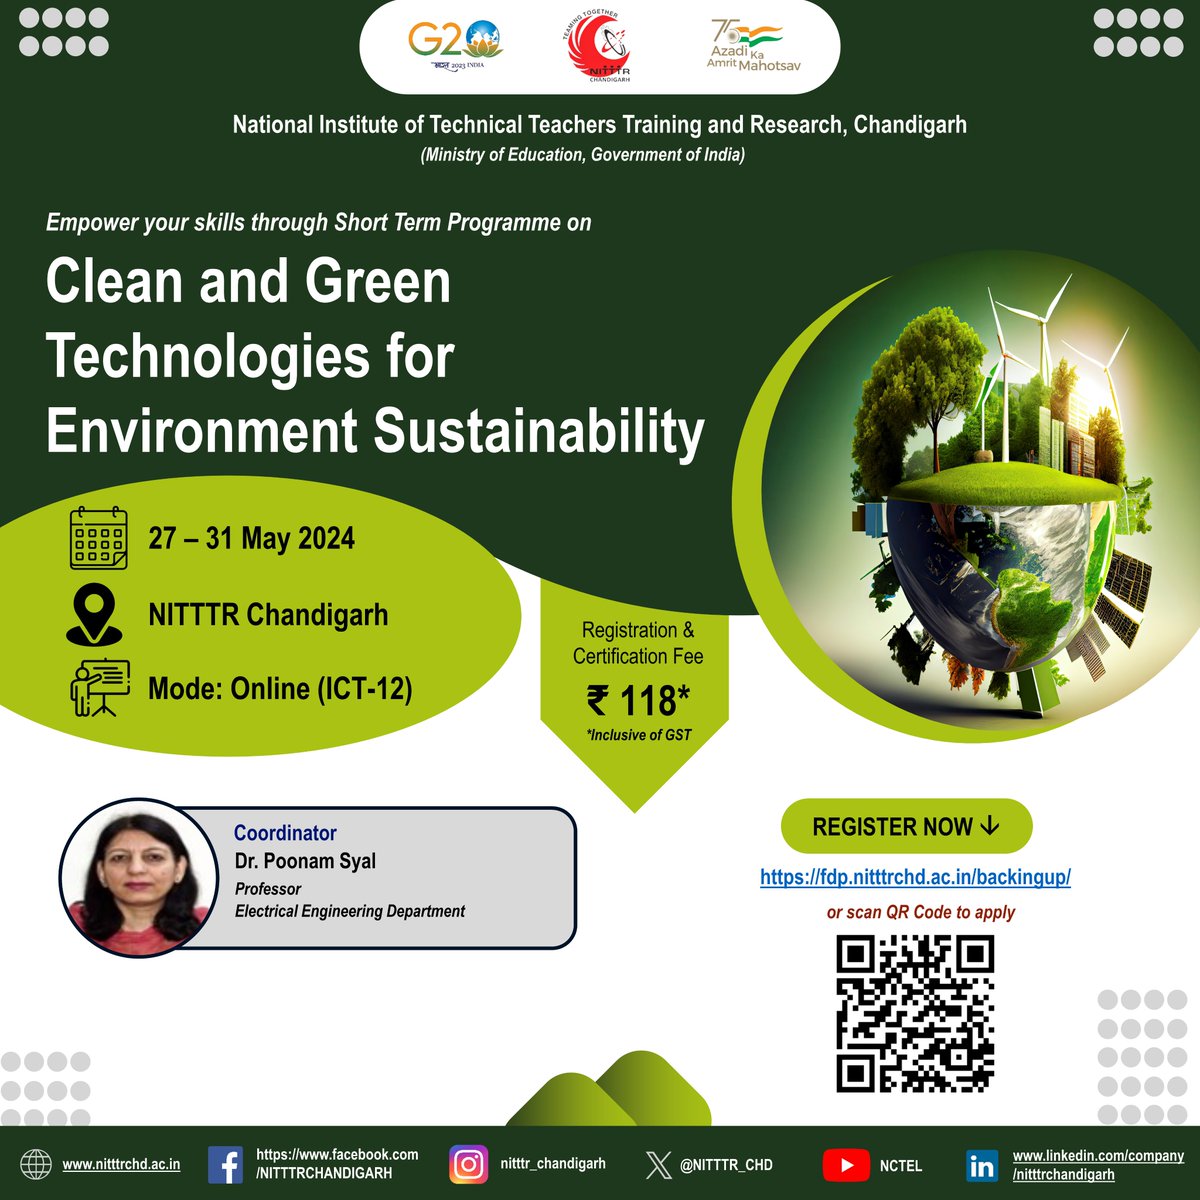 Join us for a 1 Week course on Clean and Green Technologies for Environment Sustainability to be organized by the EE Dept. from 27-31 May'24. Interested faculty & staff members may apply at fdp.nitttrchd.ac.in/backingup/ #nitttrchd #CleanTechnology #GreenTechnology #Sustainability